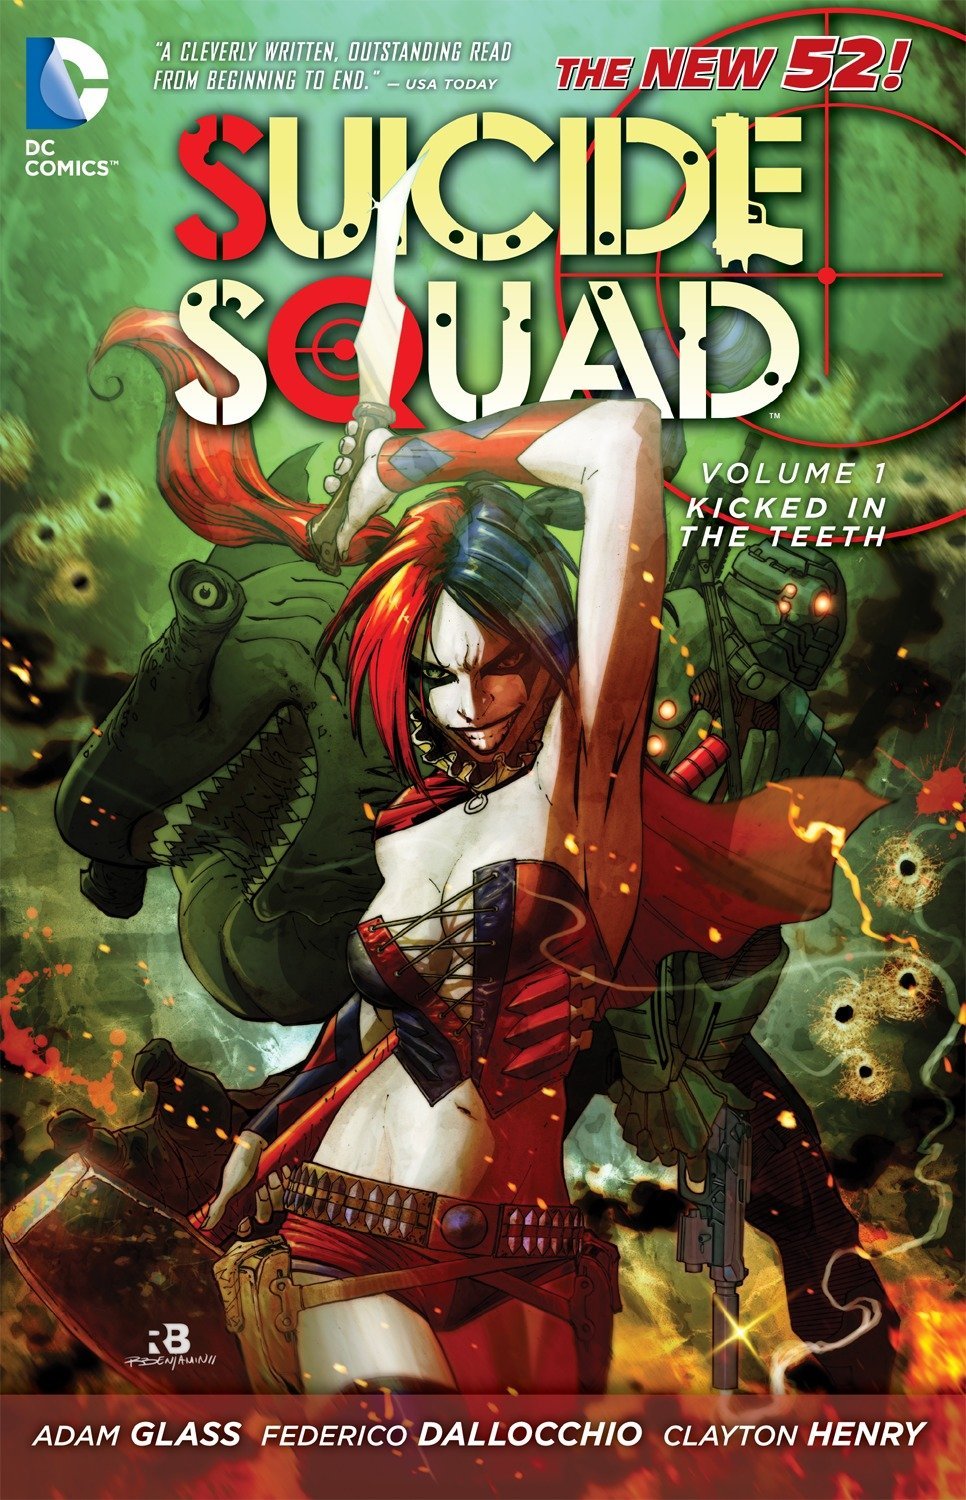 Suicide Squad (New 52) Vol. 1 : Kicked in the Teeth